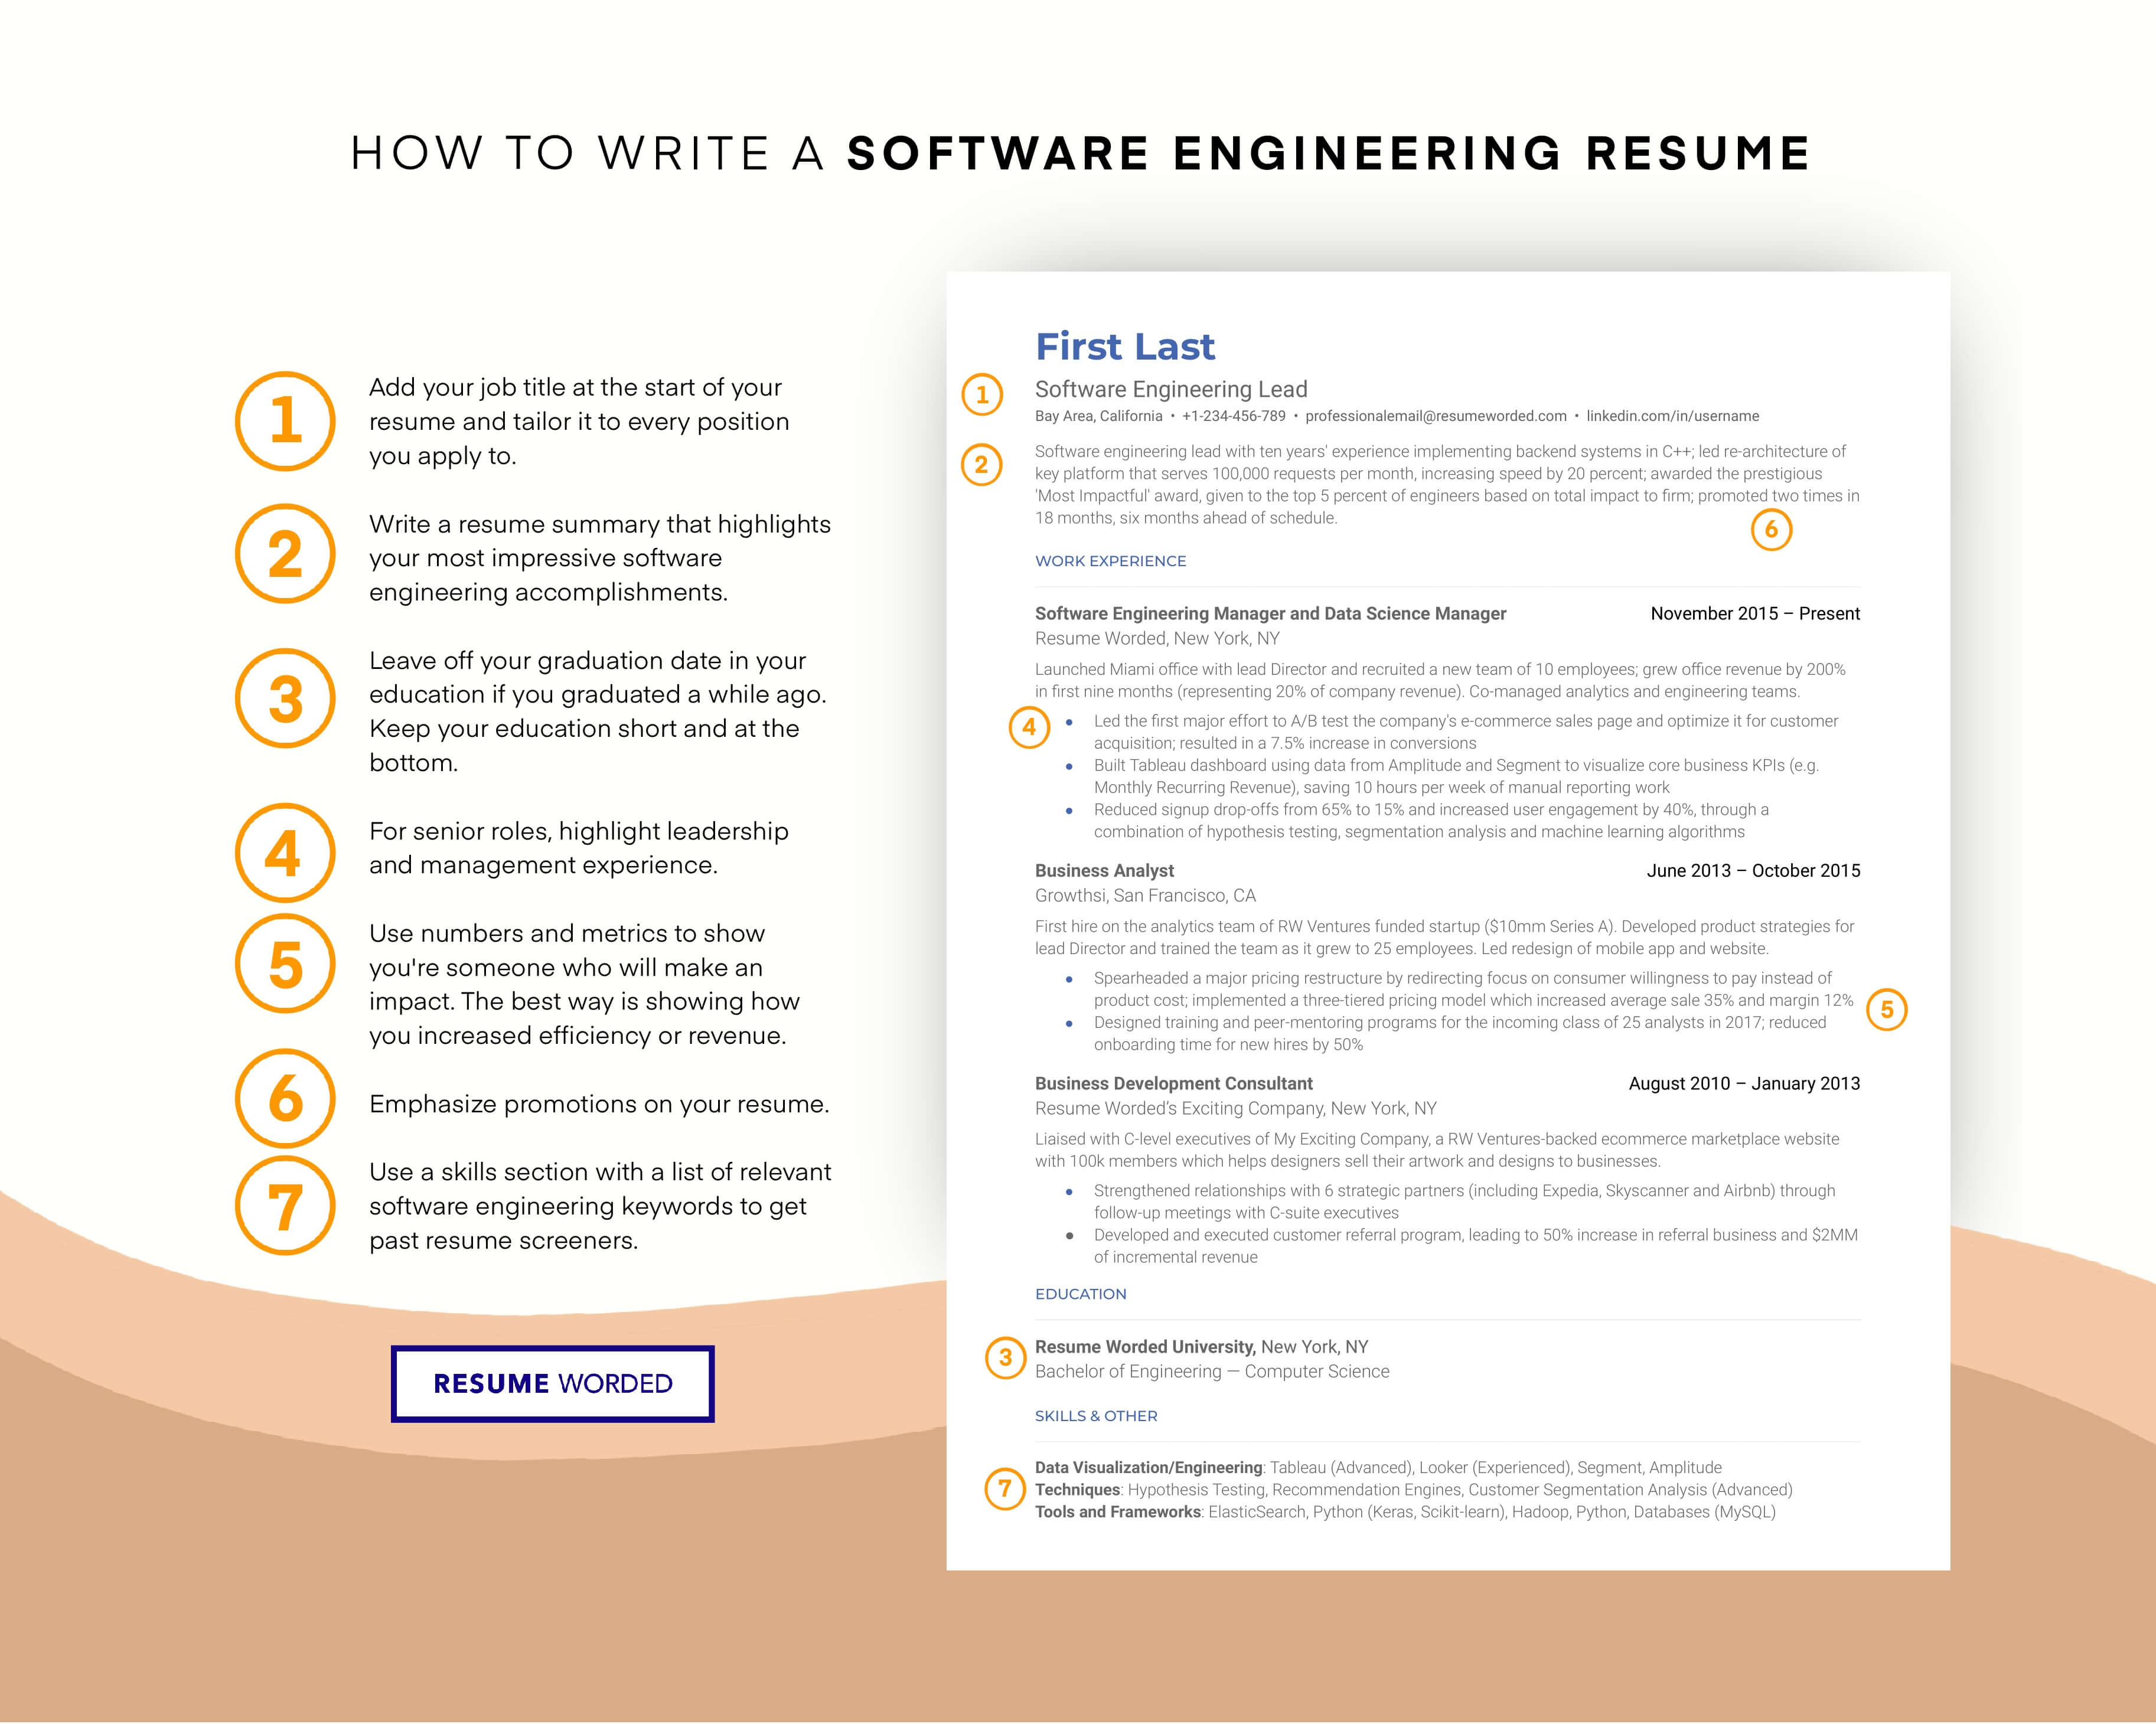 Showcase proficiency with industry-specific software - Mechanical Engineer CV